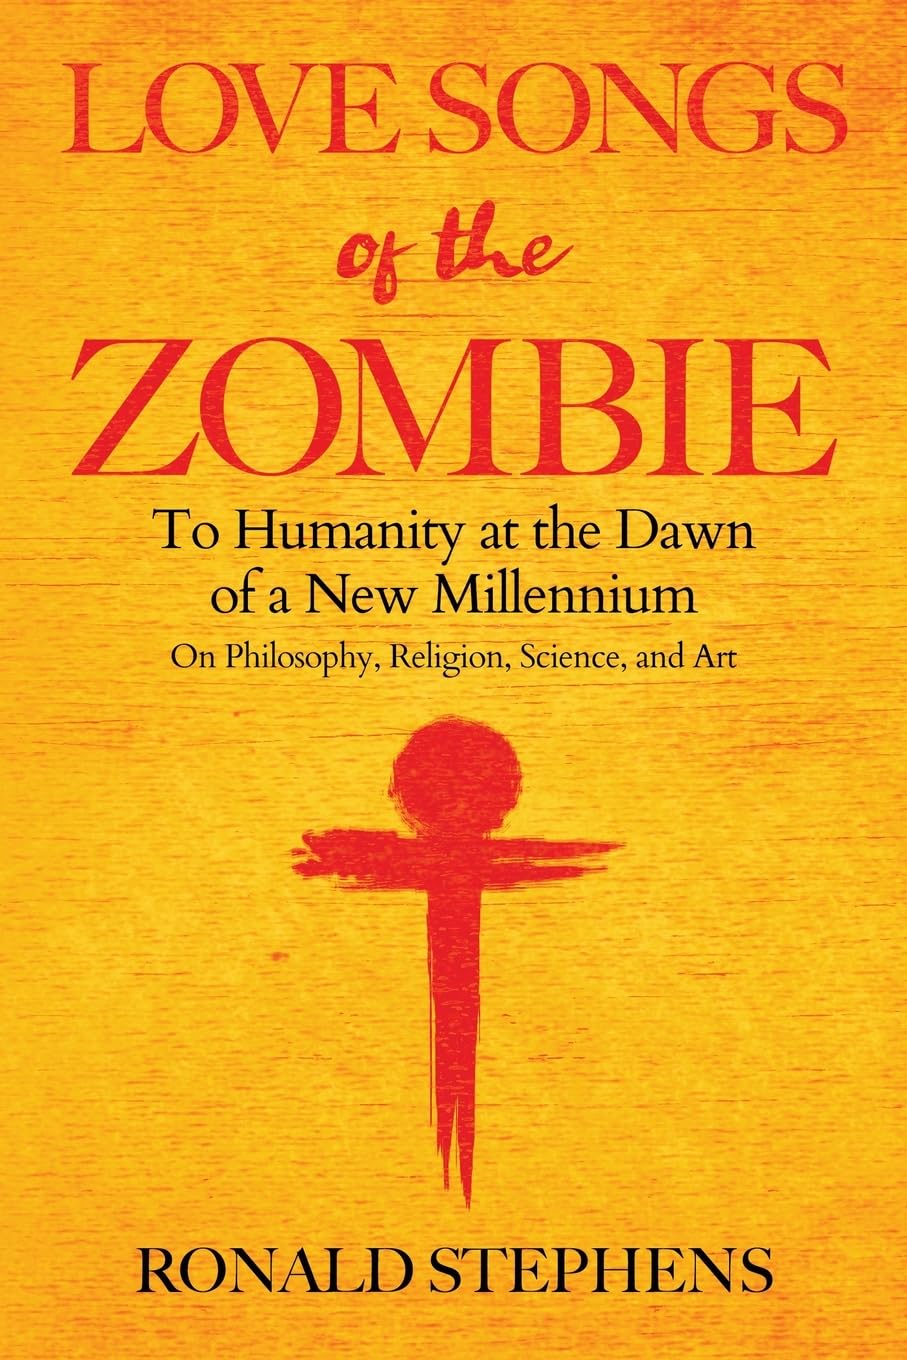 New book "Love Songs of the Zombie" by Ronald Stephens is released, an in-depth, nuanced examination of purpose that aims to reconcile spirituality, philosophy, and science